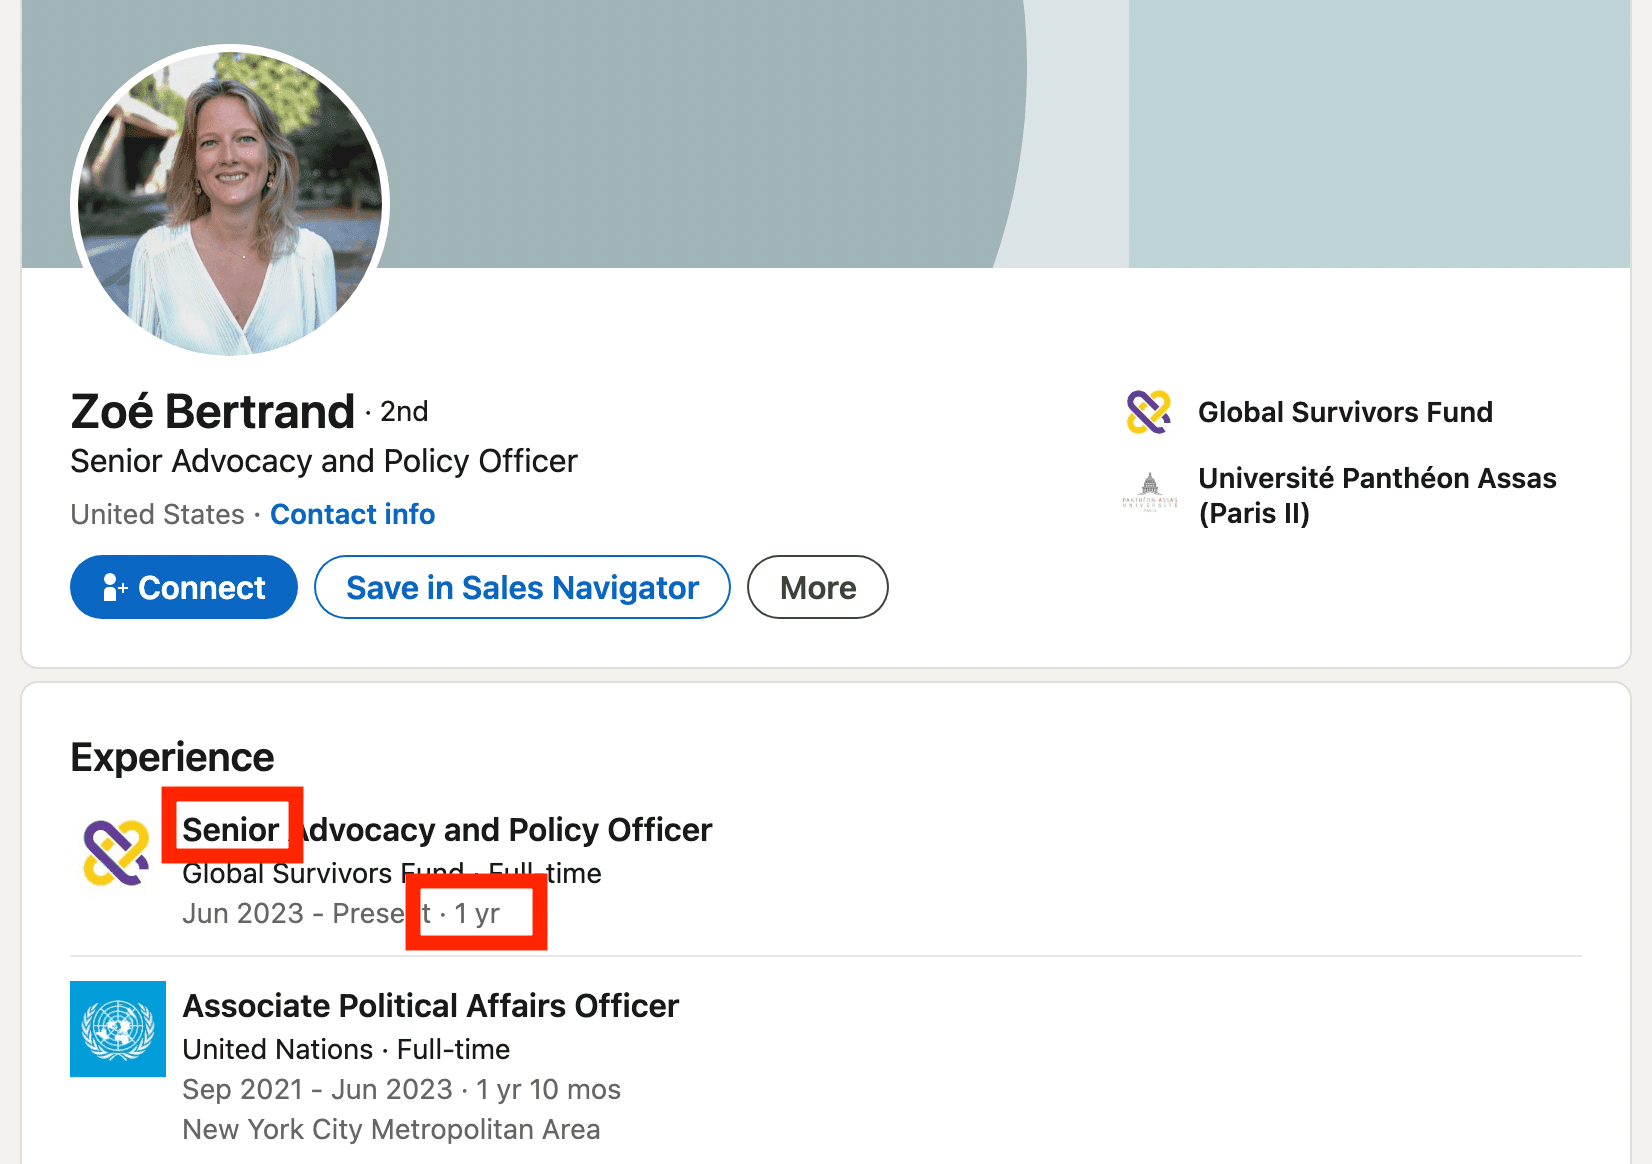 linkedin profile senior title but 1y experience in company - image26.png